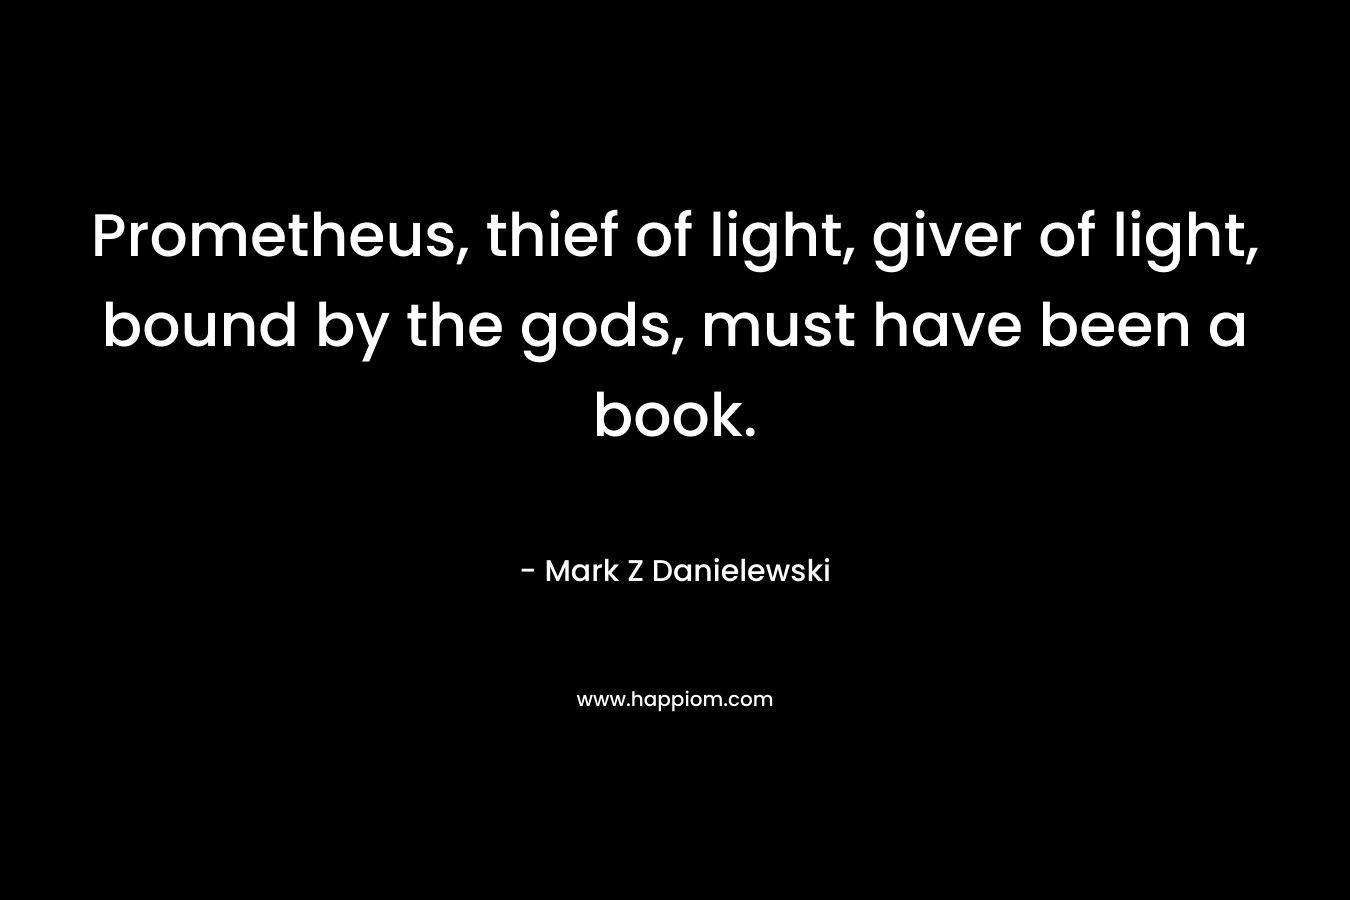 Prometheus, thief of light, giver of light, bound by the gods, must have been a book. – Mark Z Danielewski